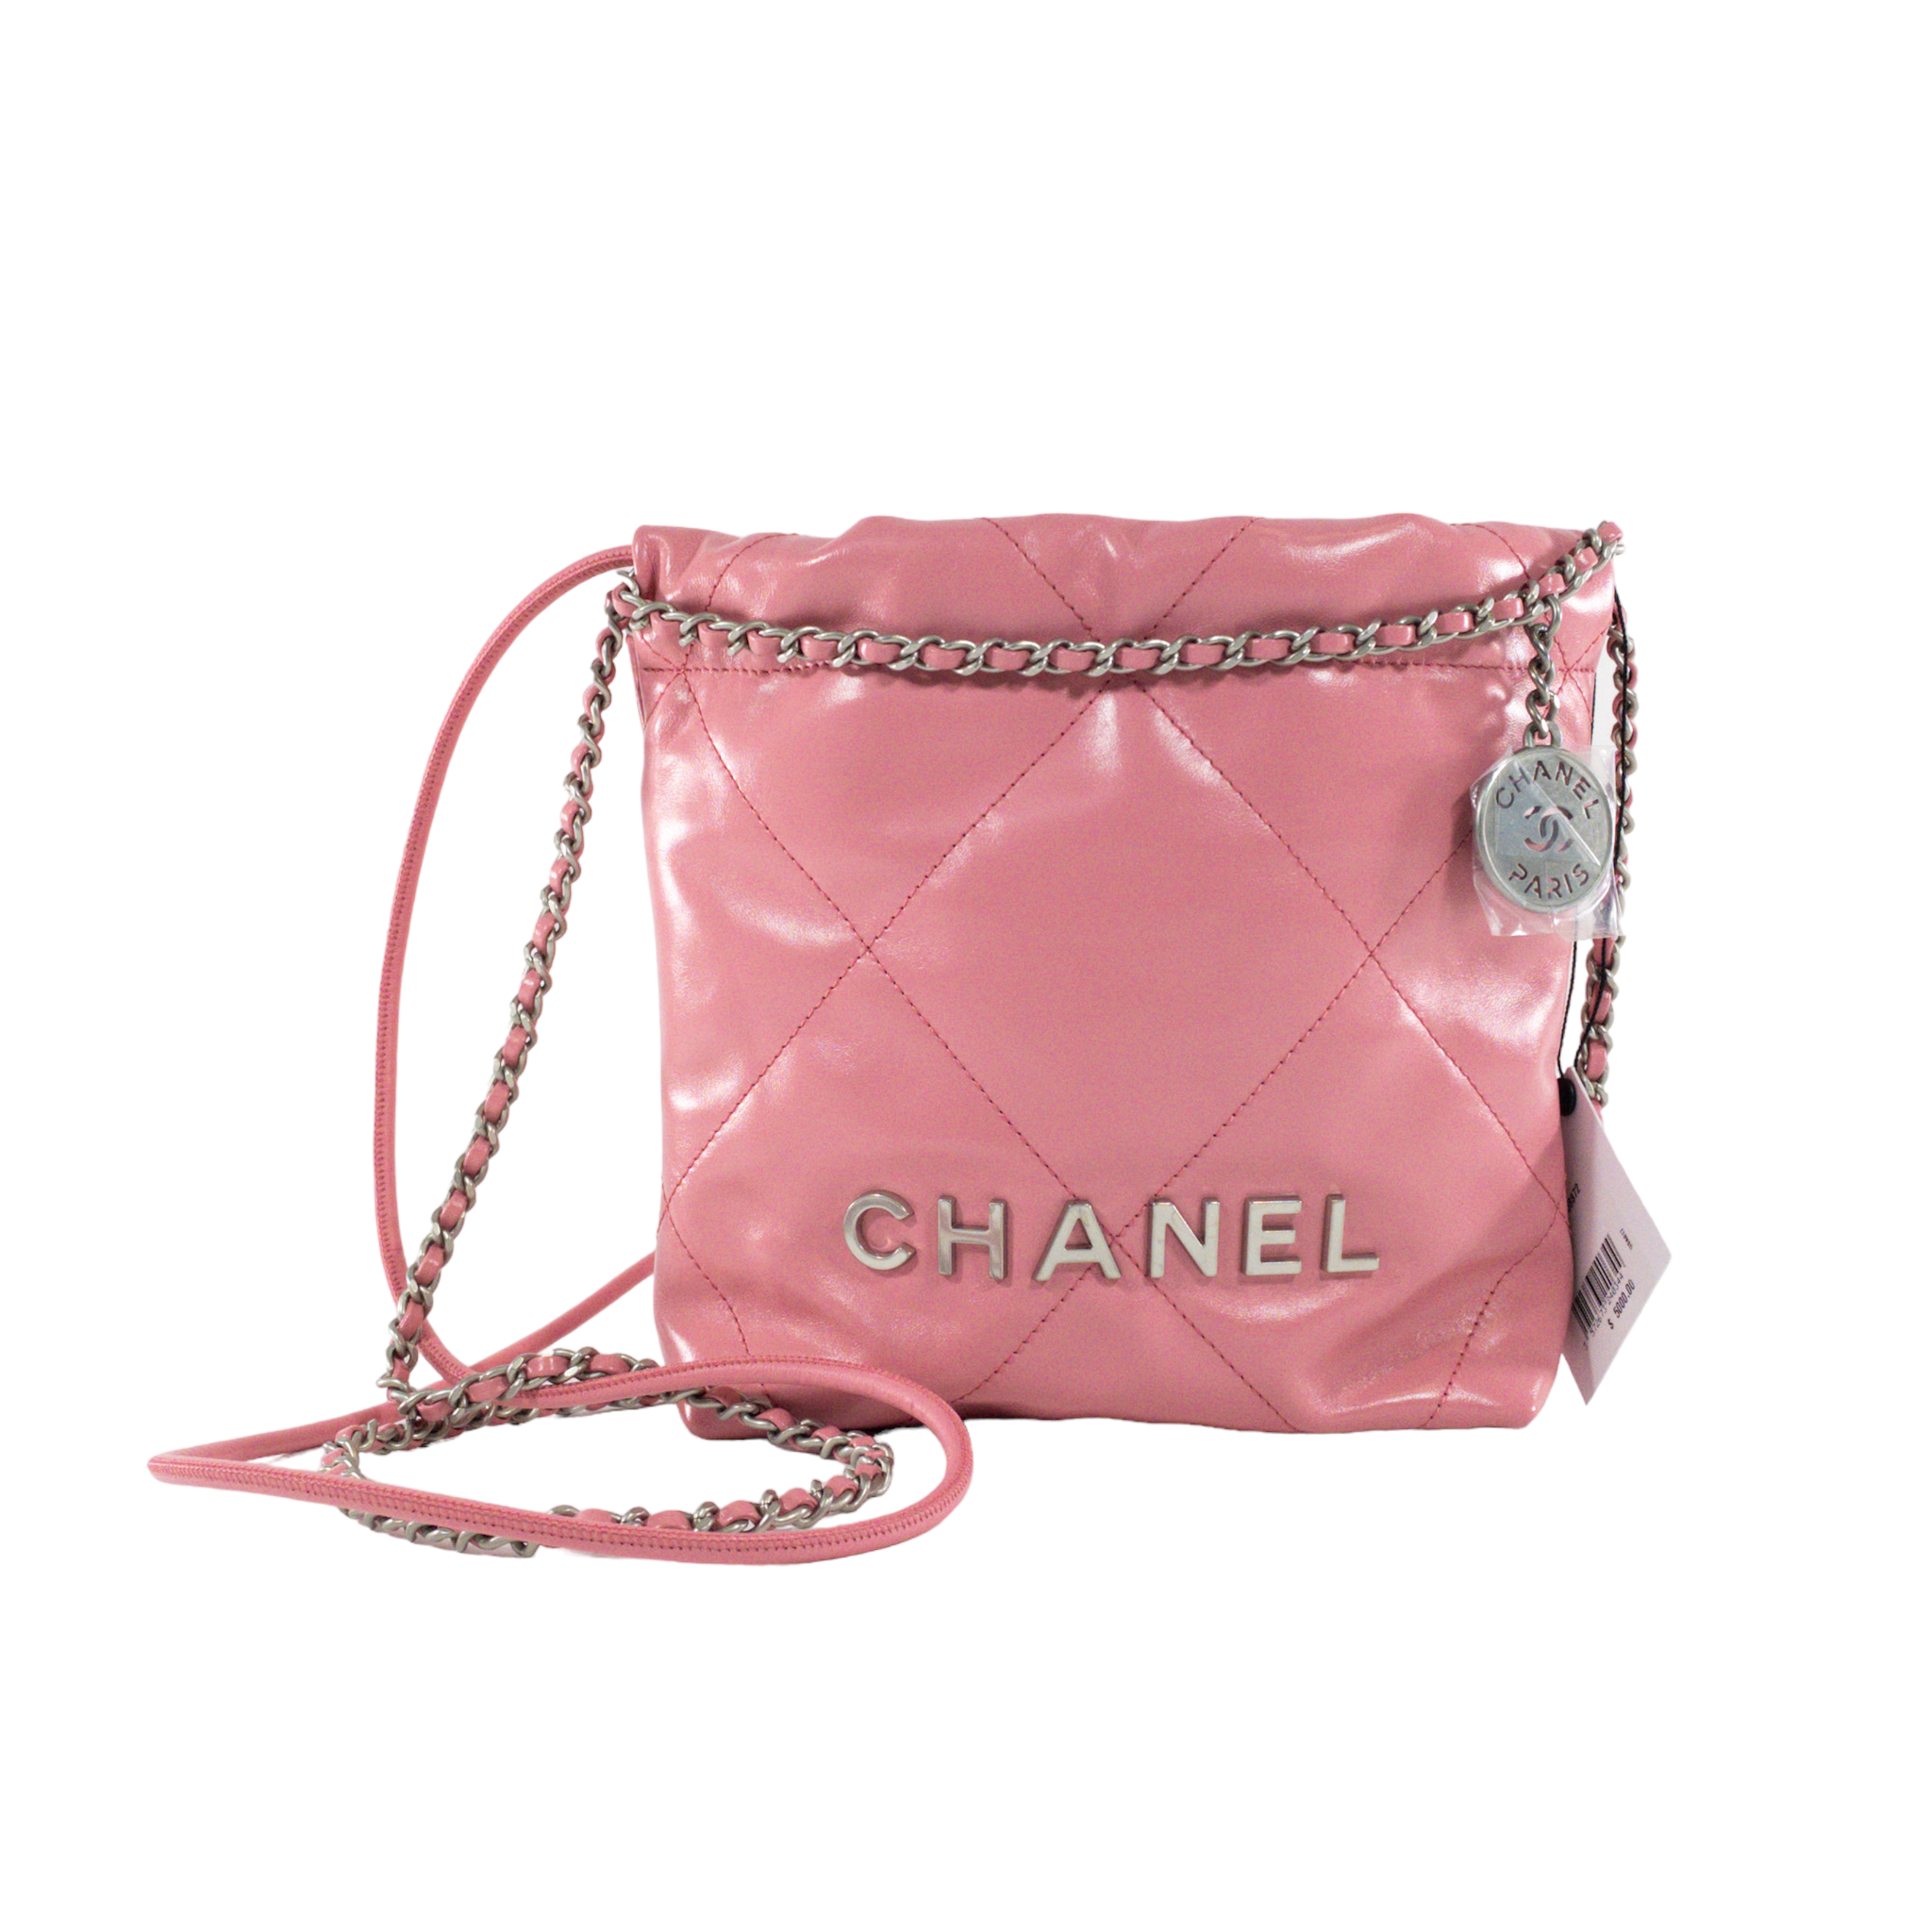 CHANEL Leather Bucket & Drawstring Bags for Women, Authenticity Guaranteed